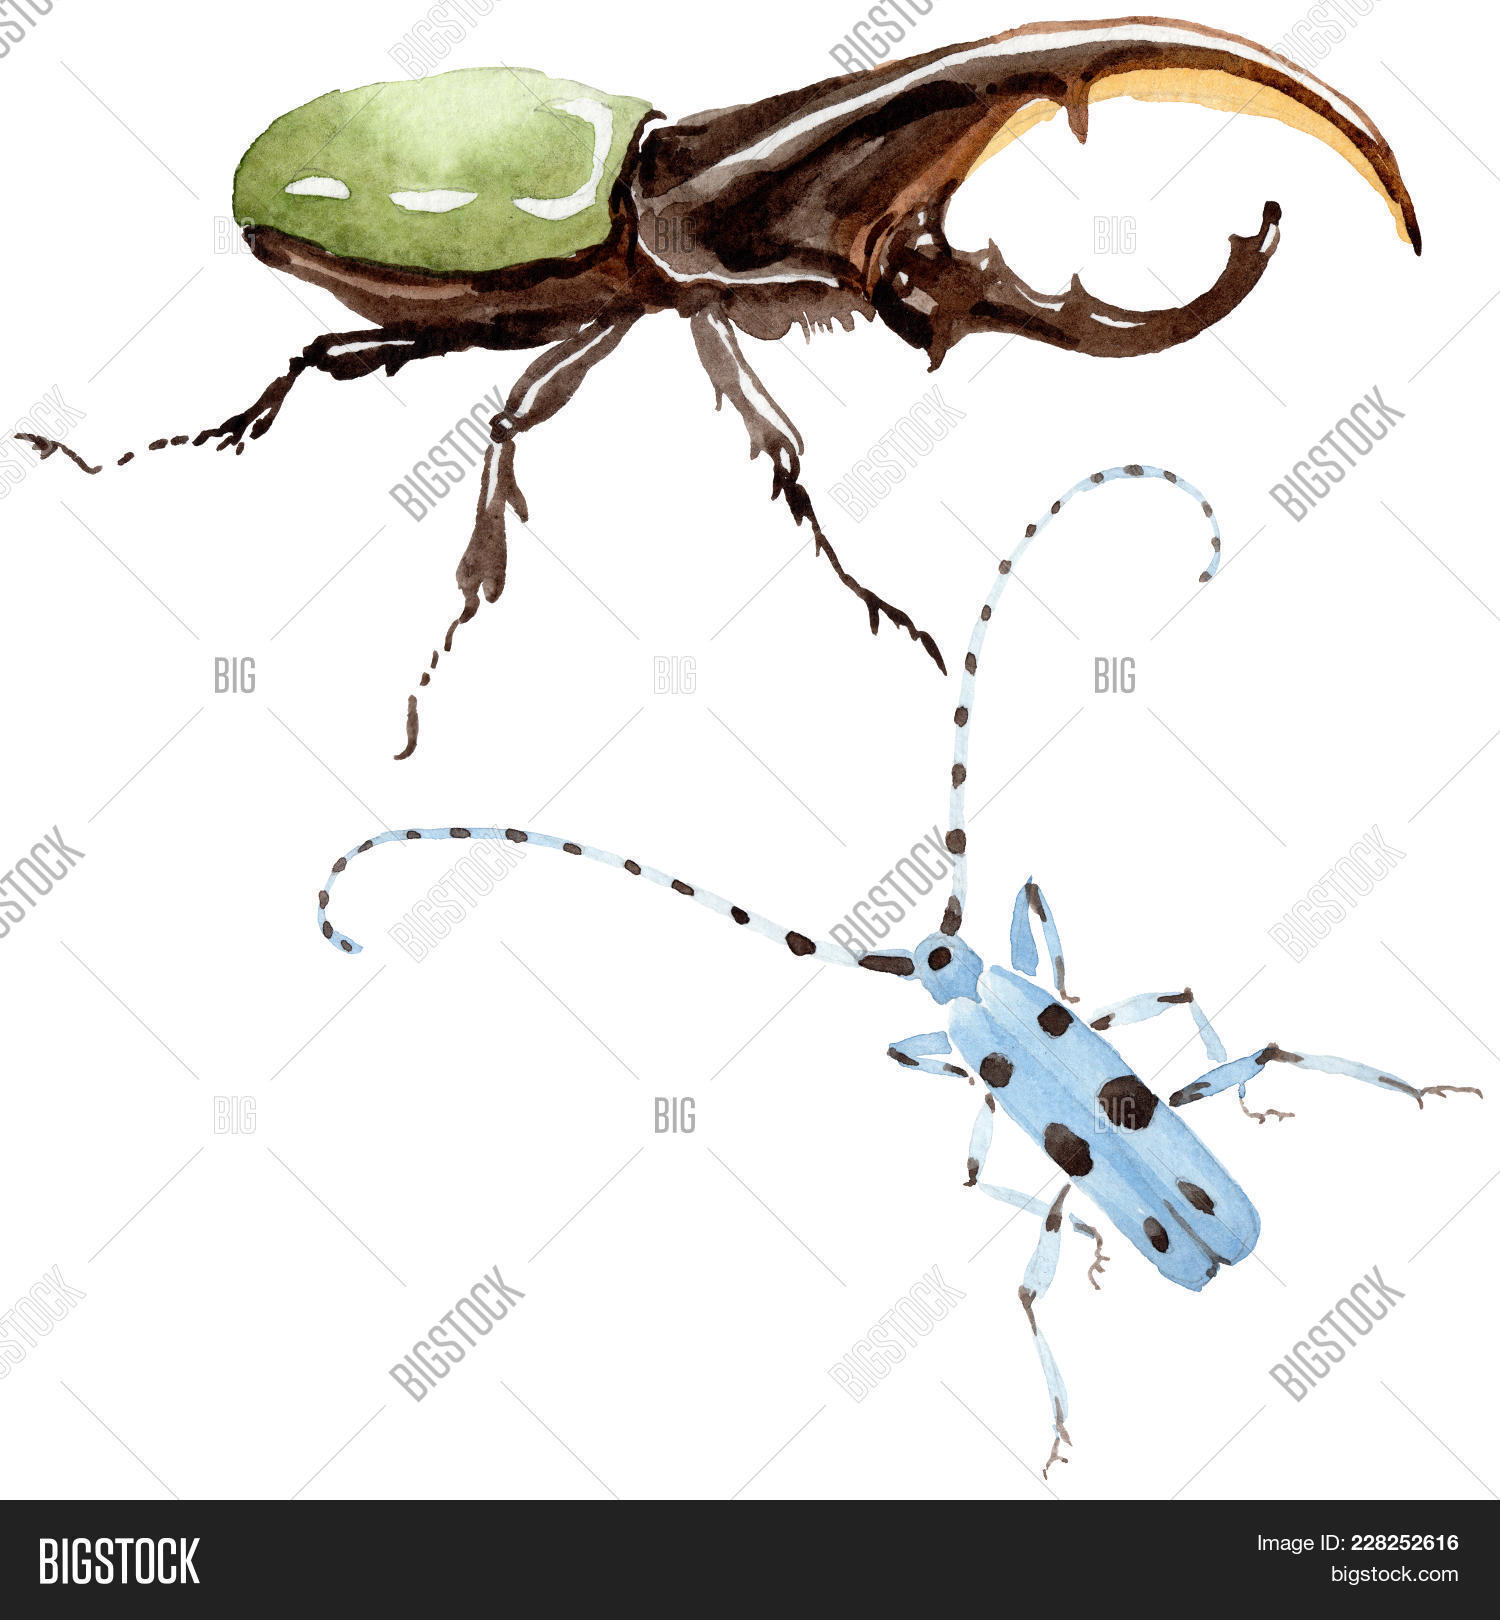 Exotic Beetles Wild Insect Image & Photo | Bigstock